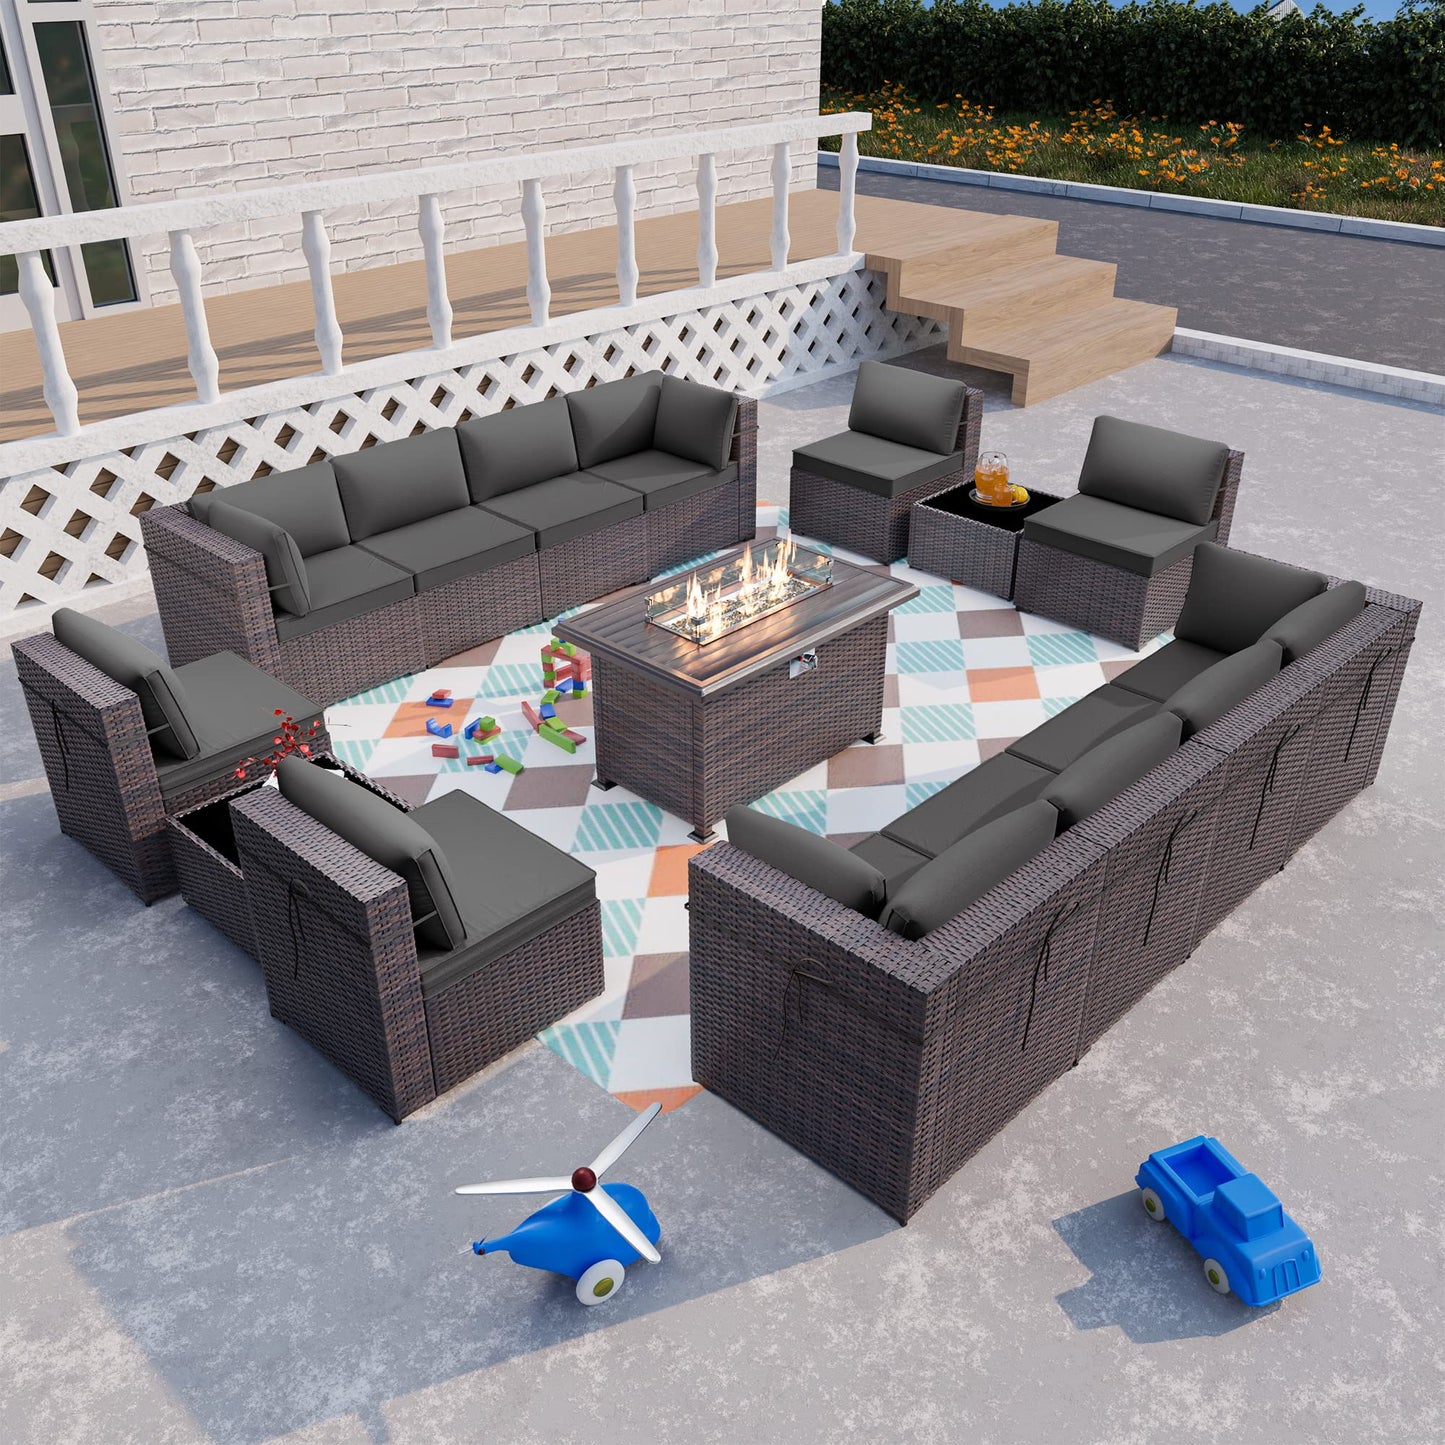 ALAULM 15 Pieces Outdoor Patio Furniture Set with Propane Fire Pit Table Outdoor Sectional Sofa Sets